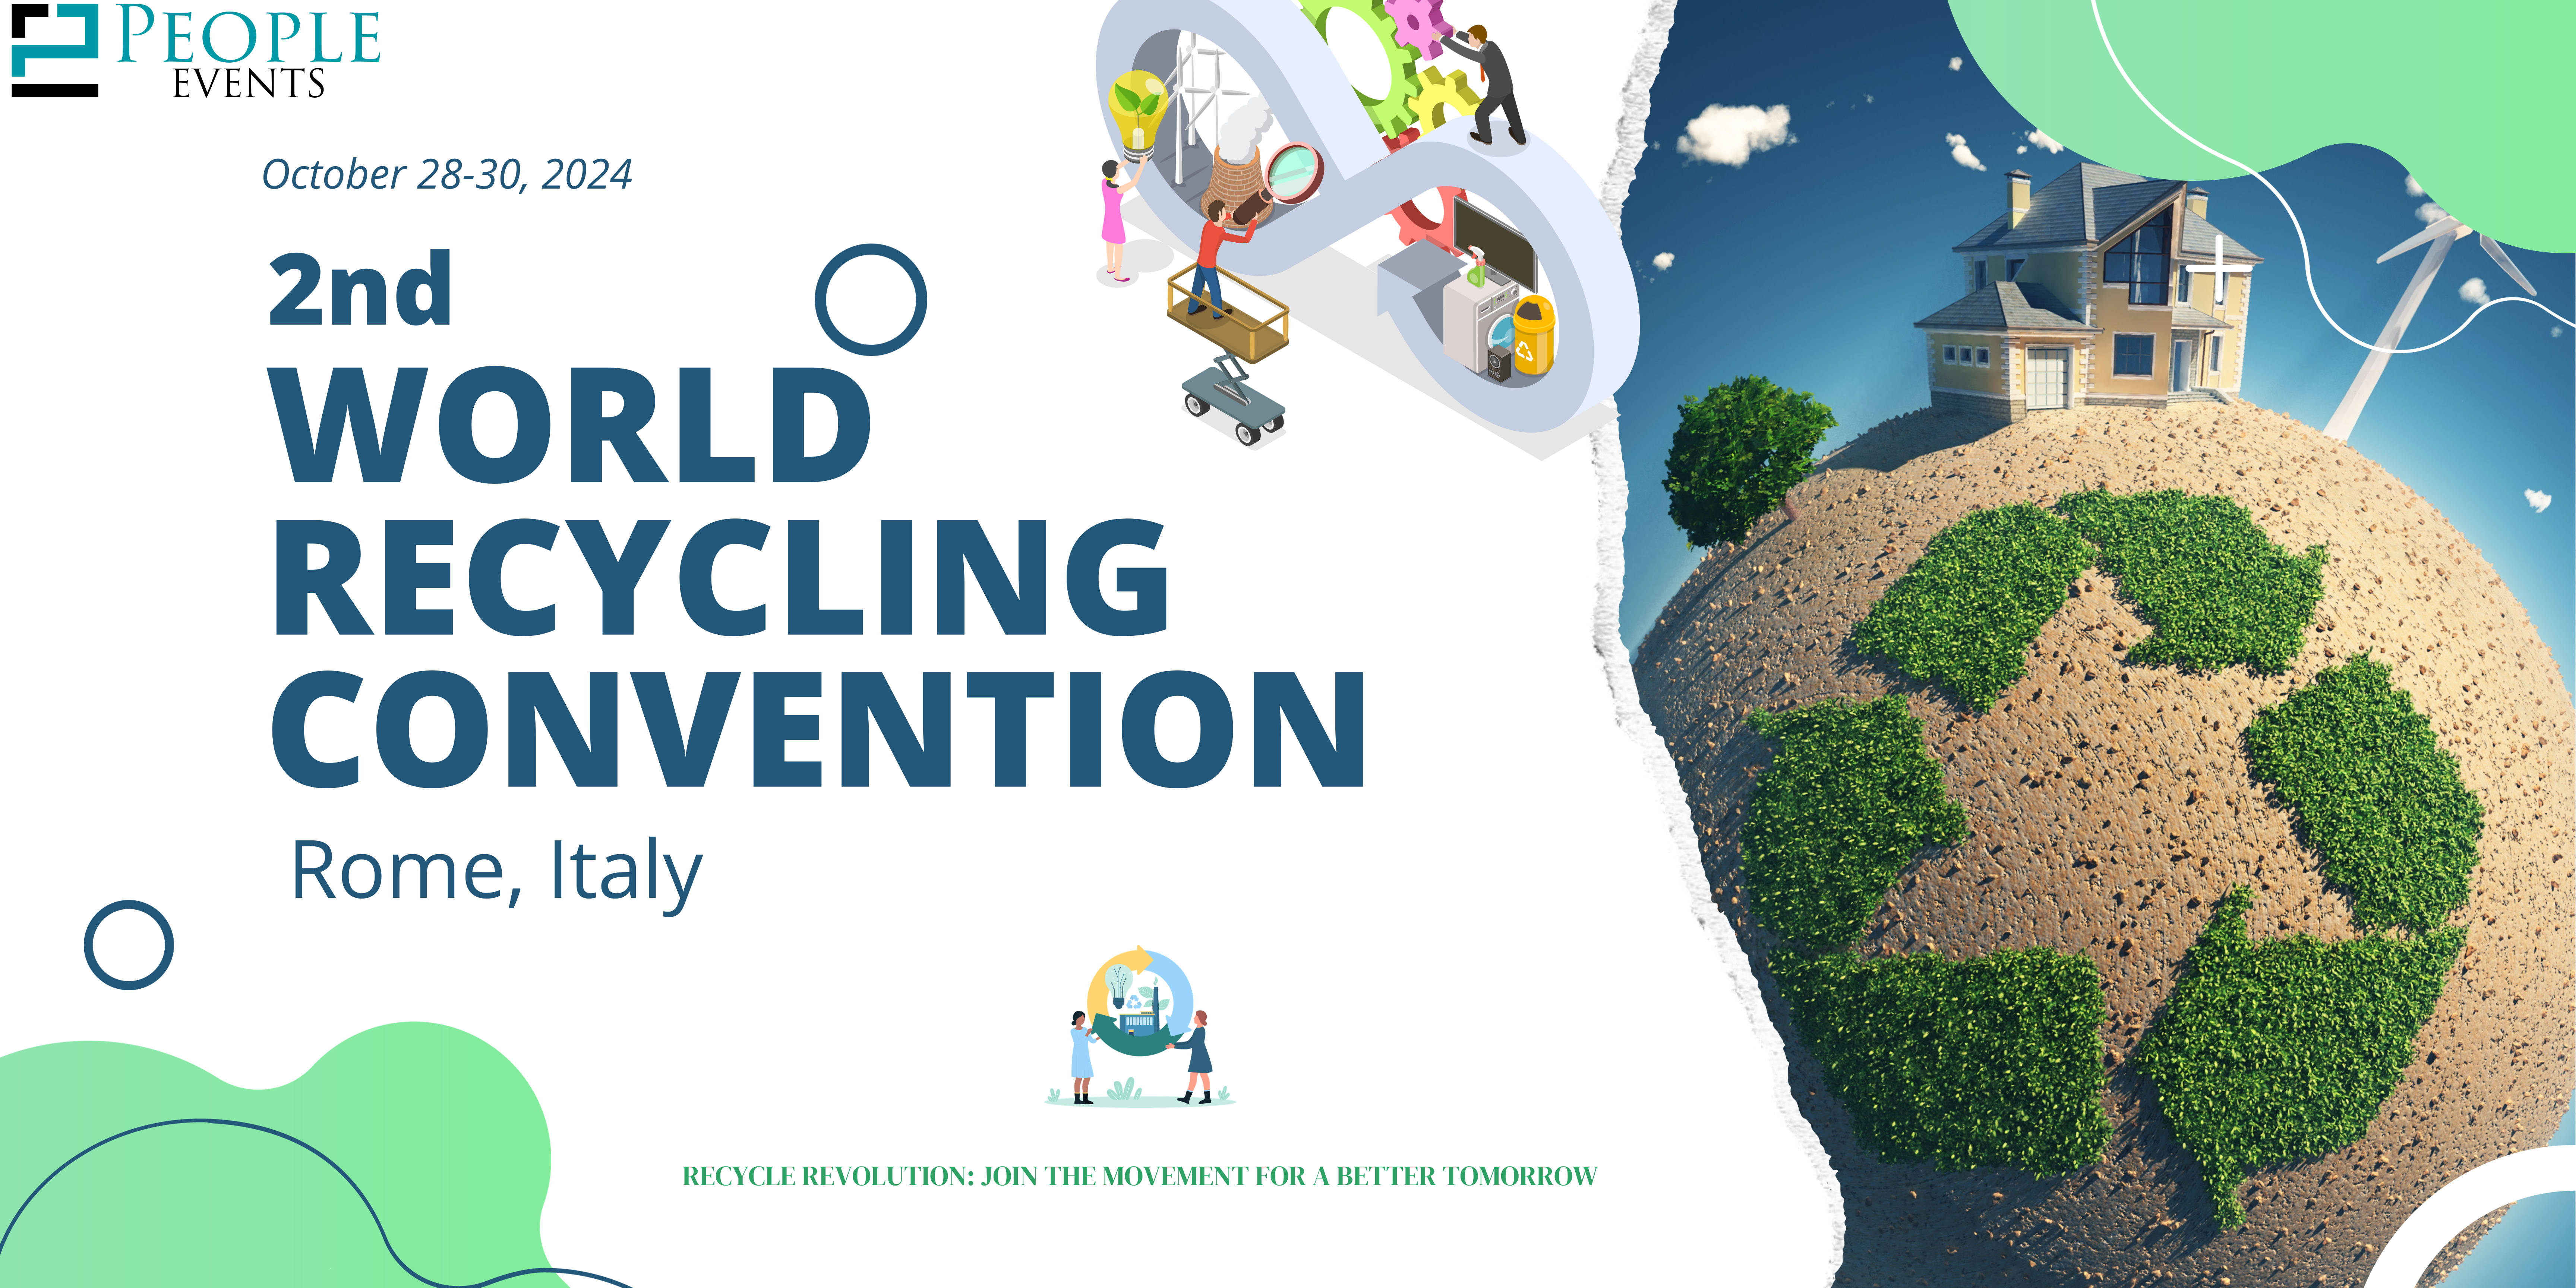 World Recycling Convention Offers Exclusive Discount Coupons in Celebration of Global Recycling Day